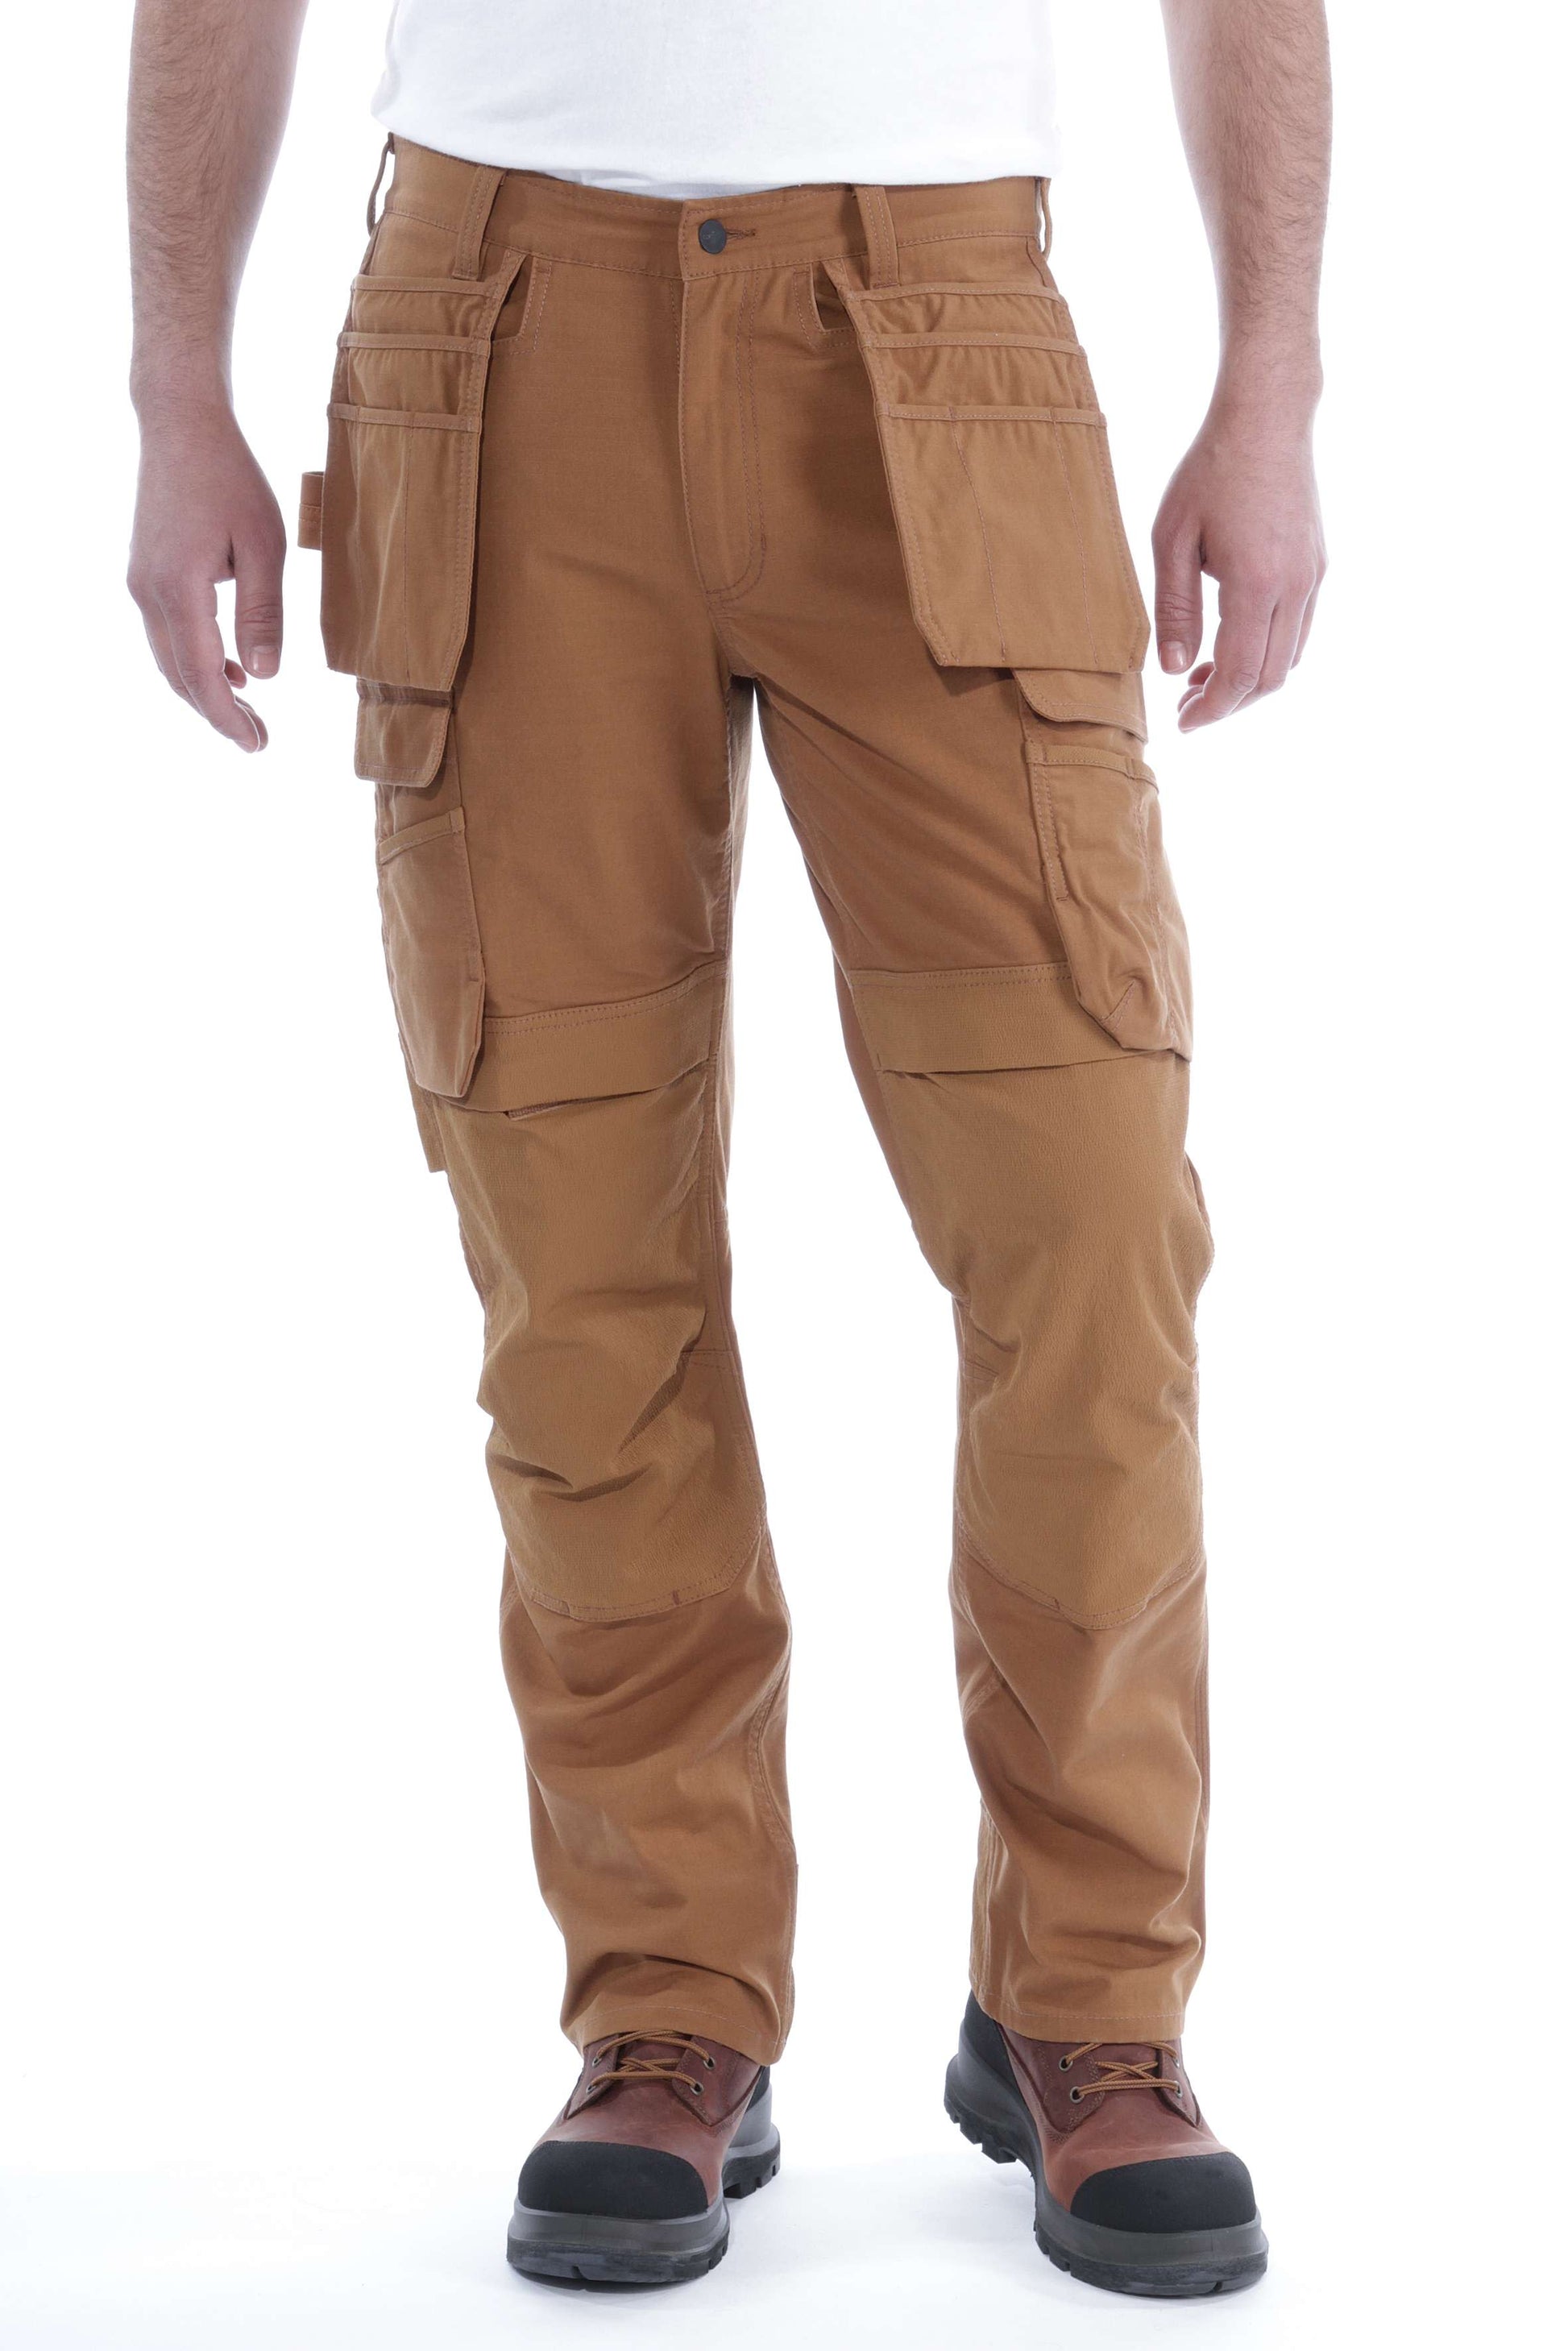 Carhartt Men's Rugged Flex Steel Relaxed Fit Double-Front Pant